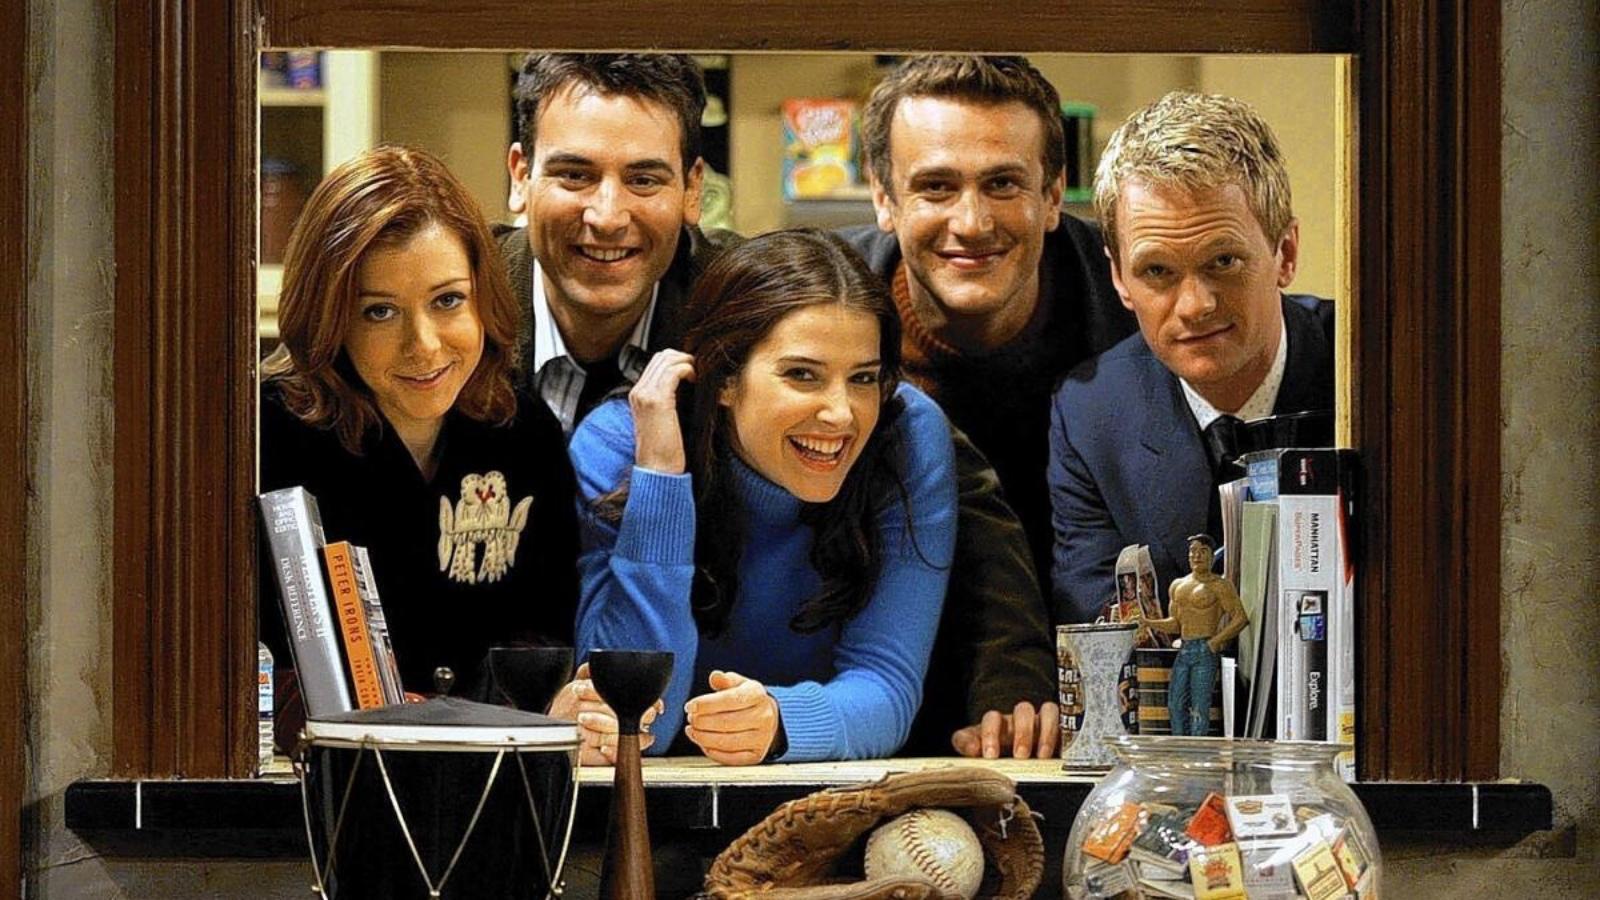 The cast of How I Met Your Mother sitcom